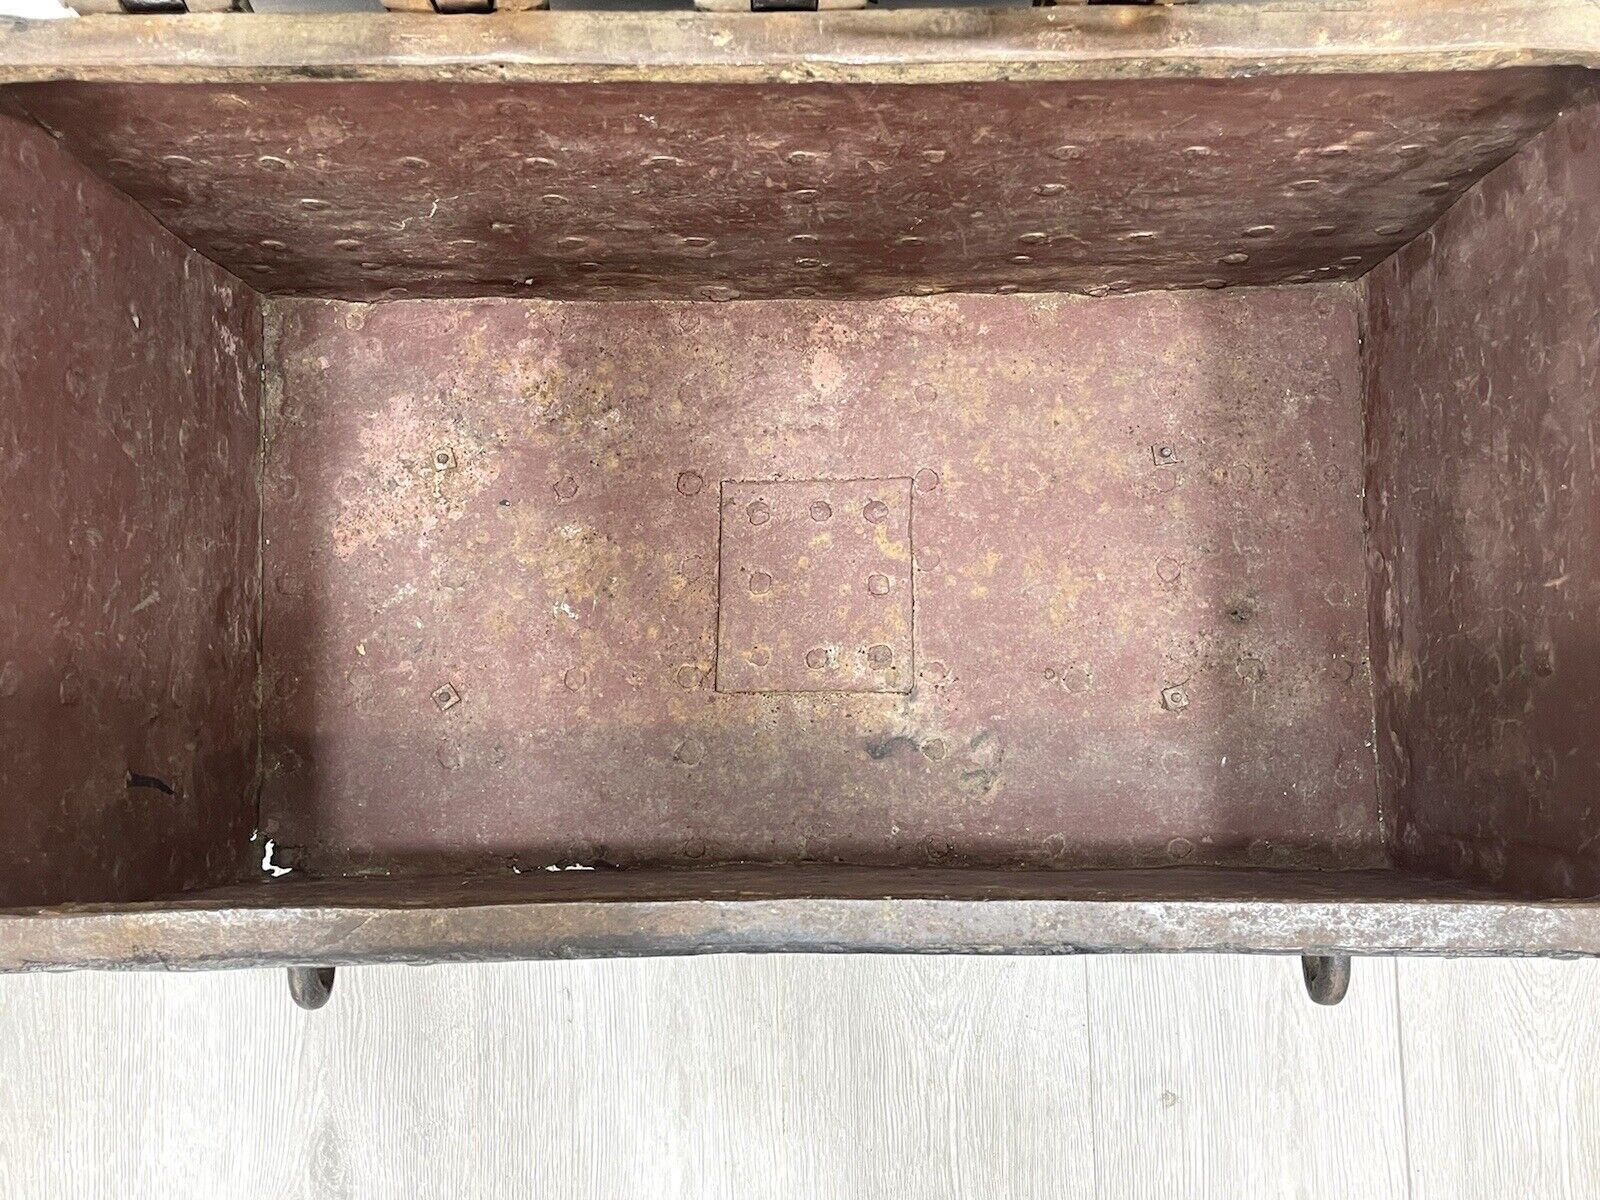 17th Century, Wrought Iron Strong Box / Armada Chest